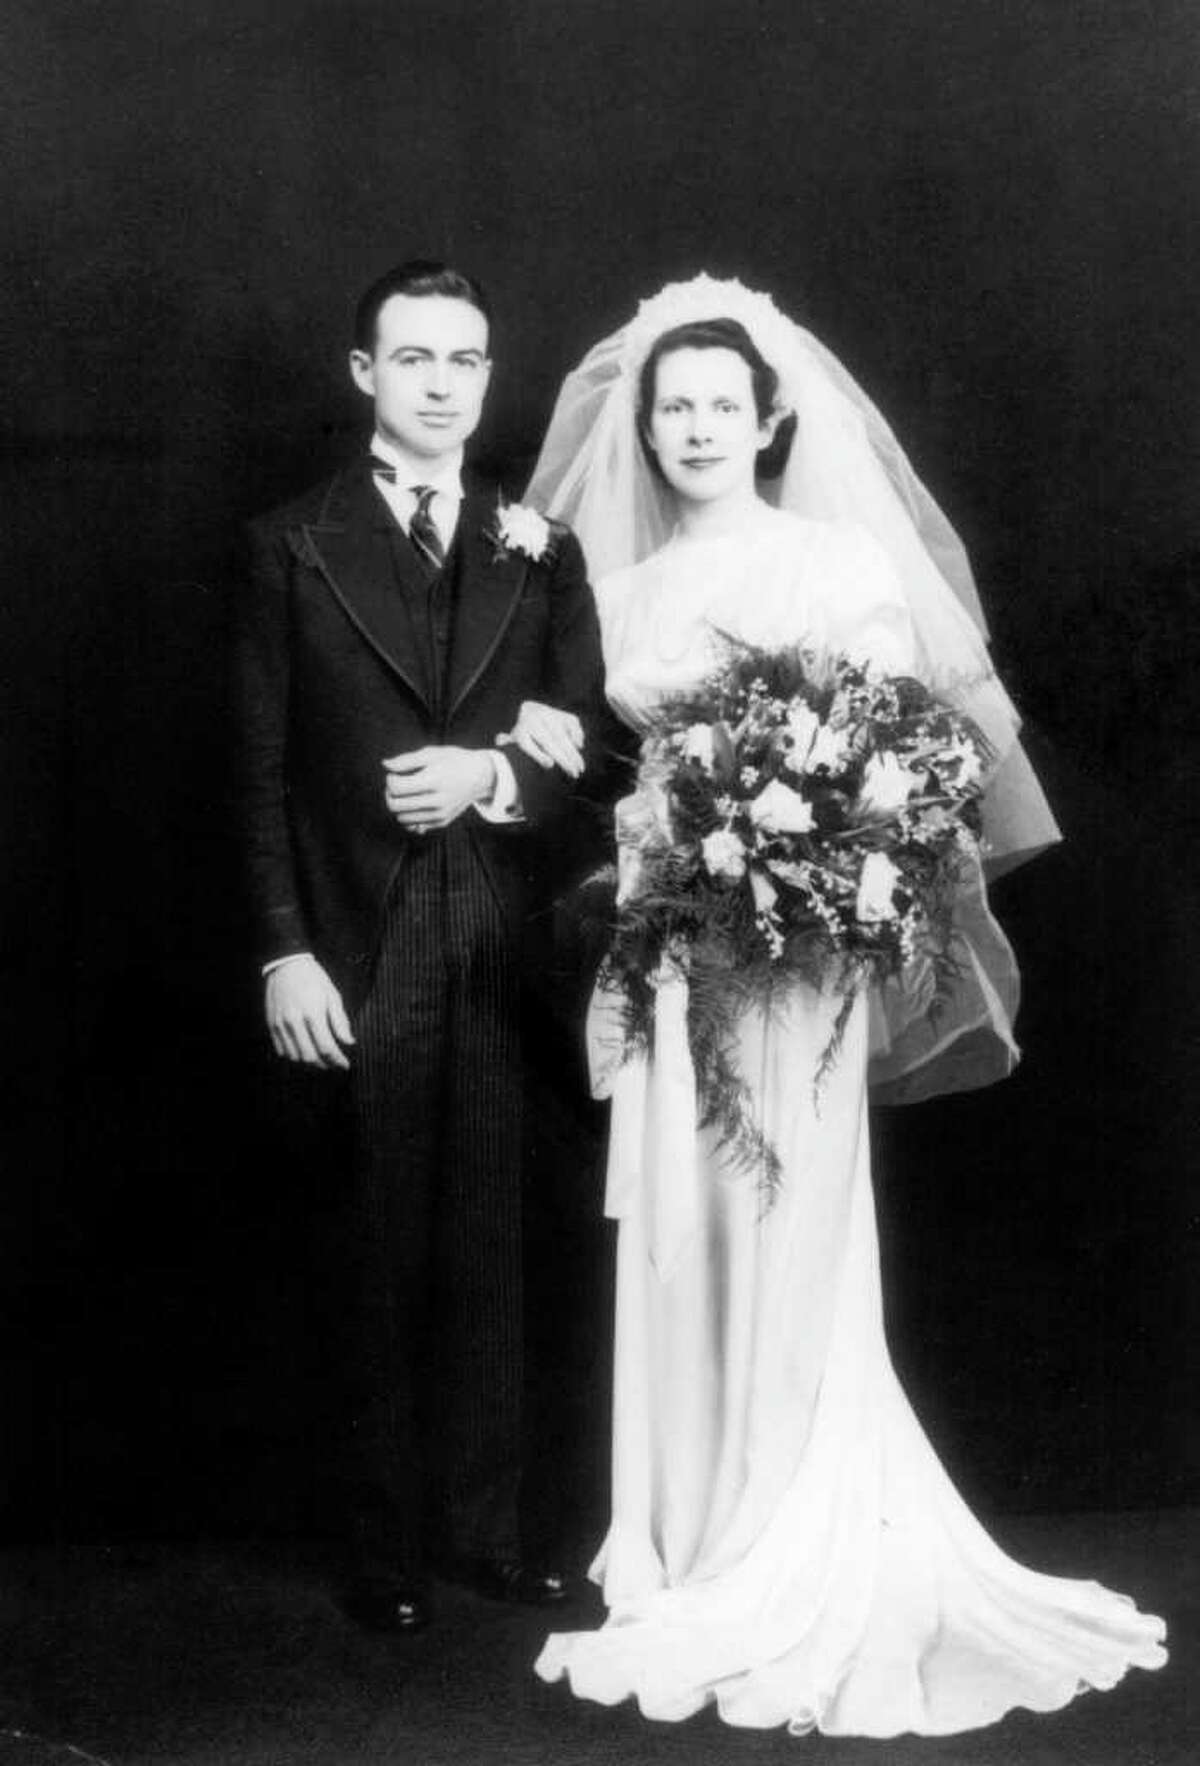 The 1936 wedding photo of Bill and Agnes Malloy, parents of Gov. Dan Malloy